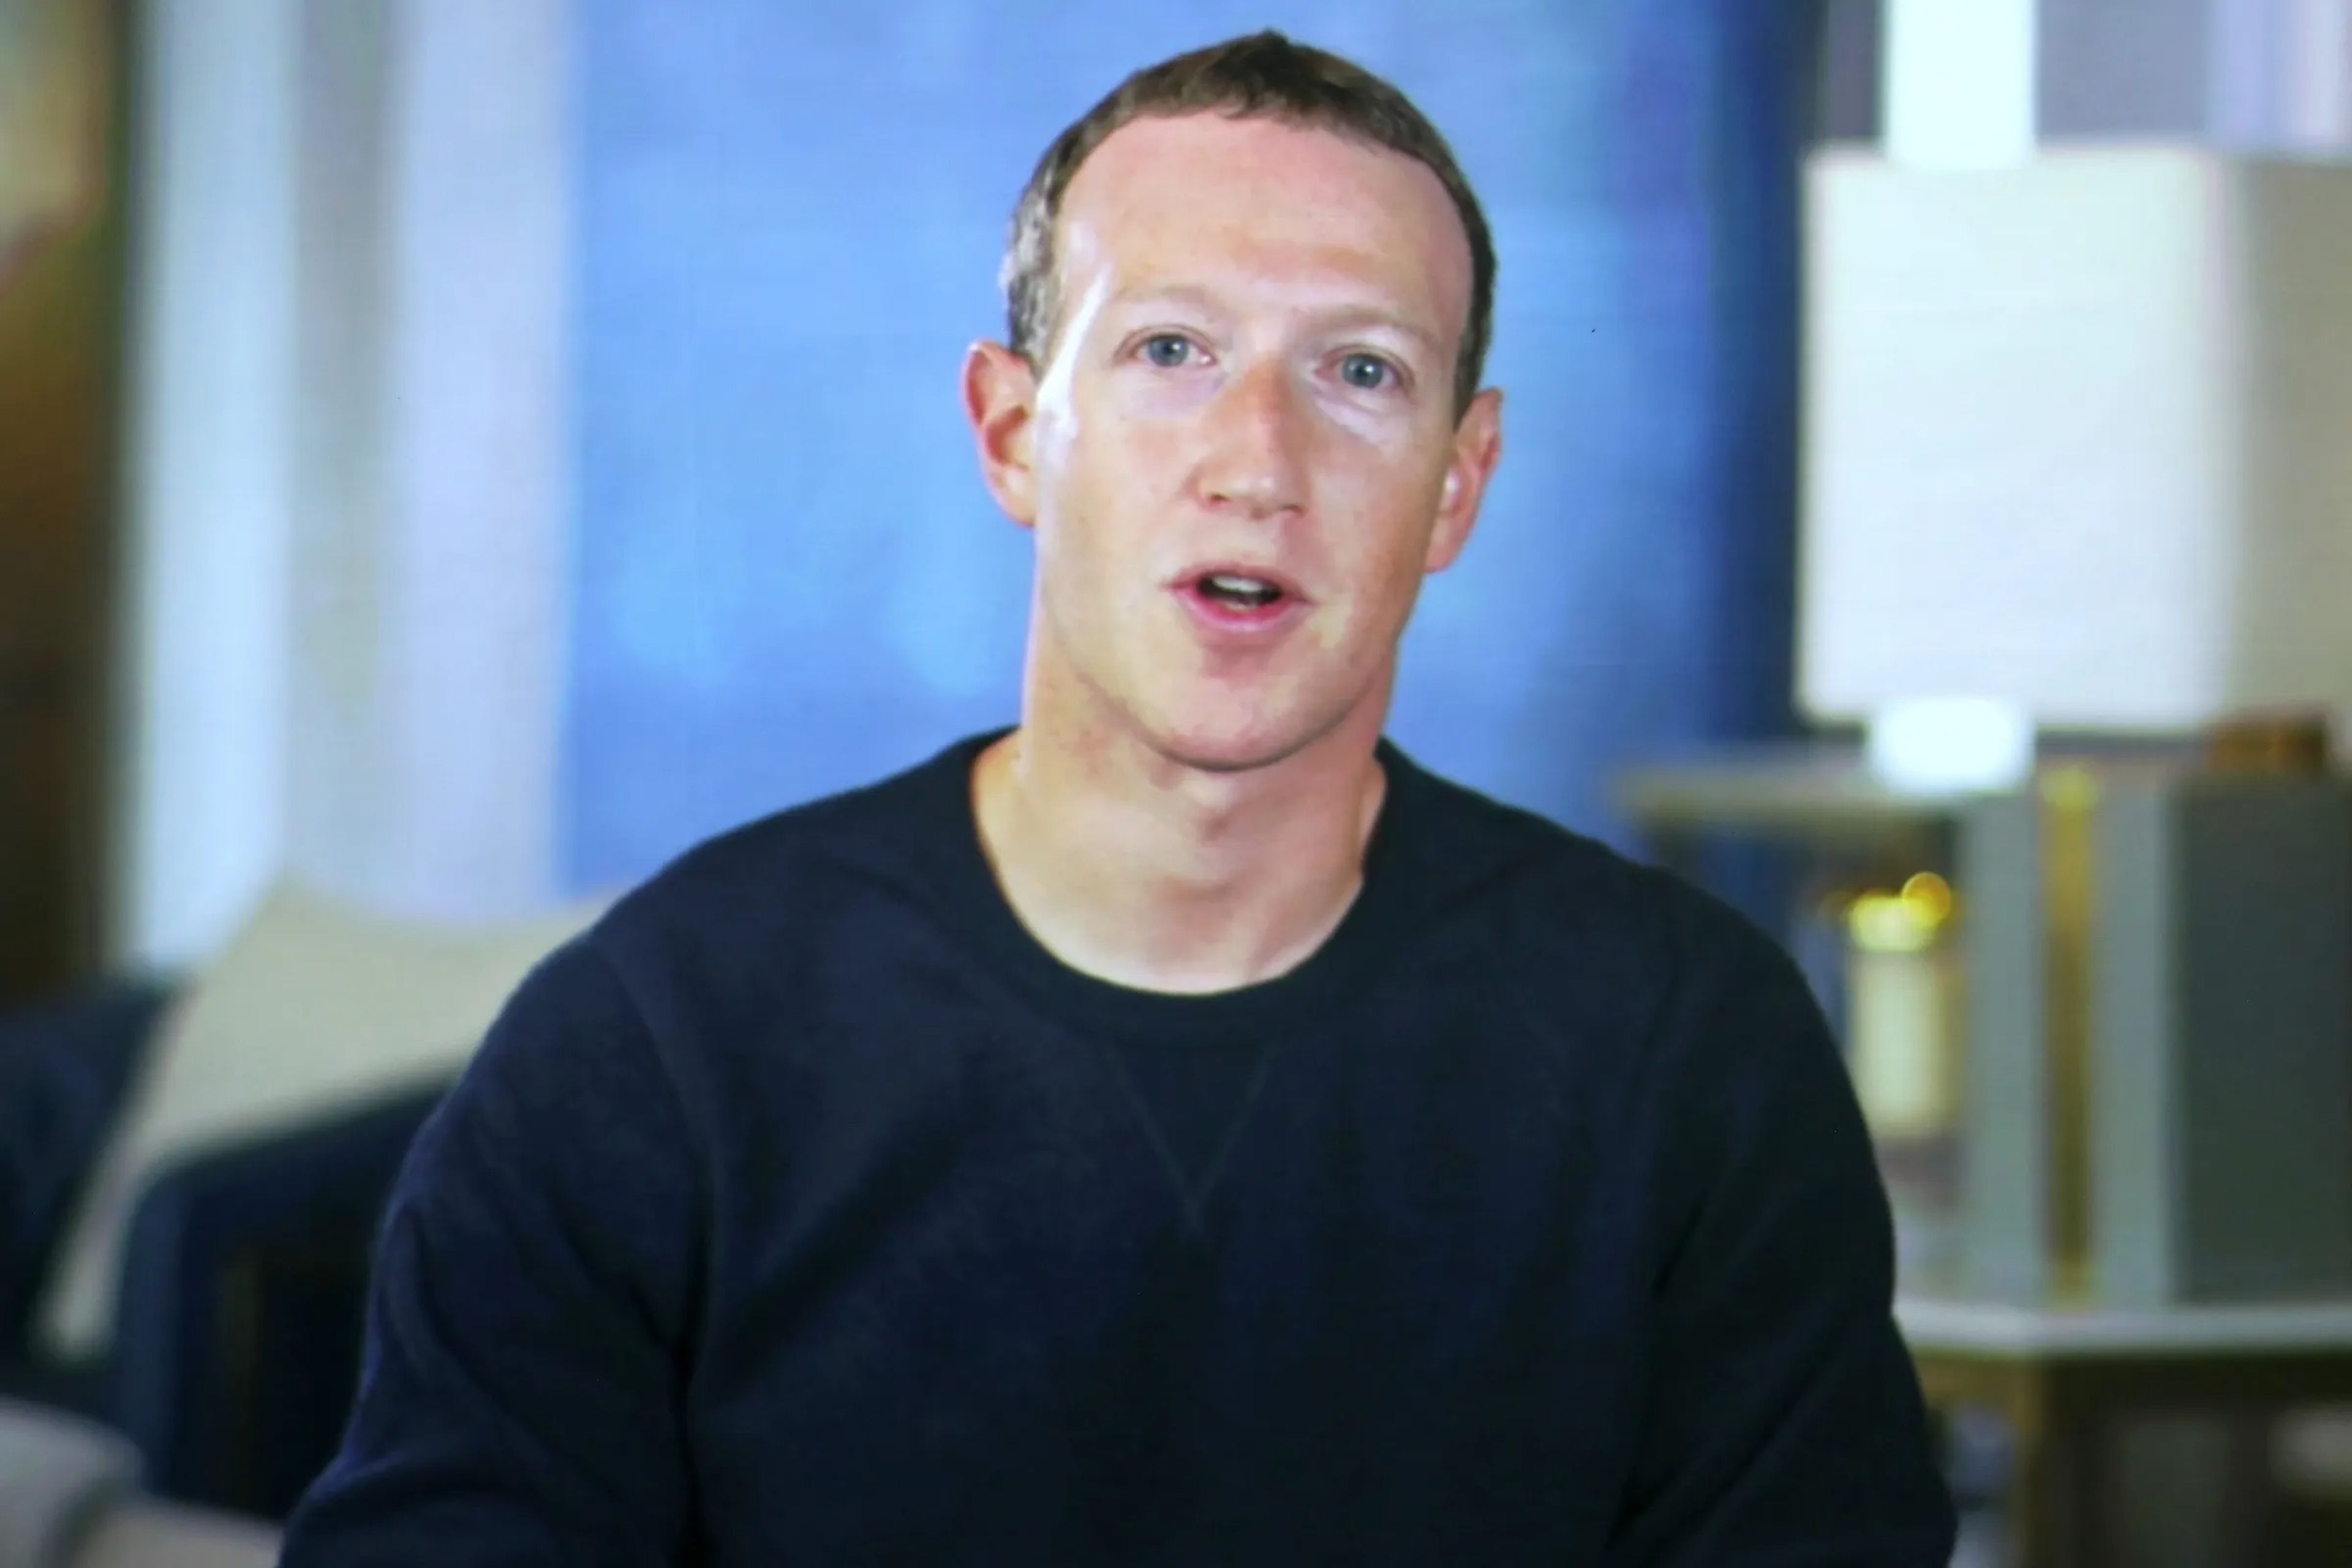 Mark Zuckerberg appearing at a web conference wearing a navy sweatshirt